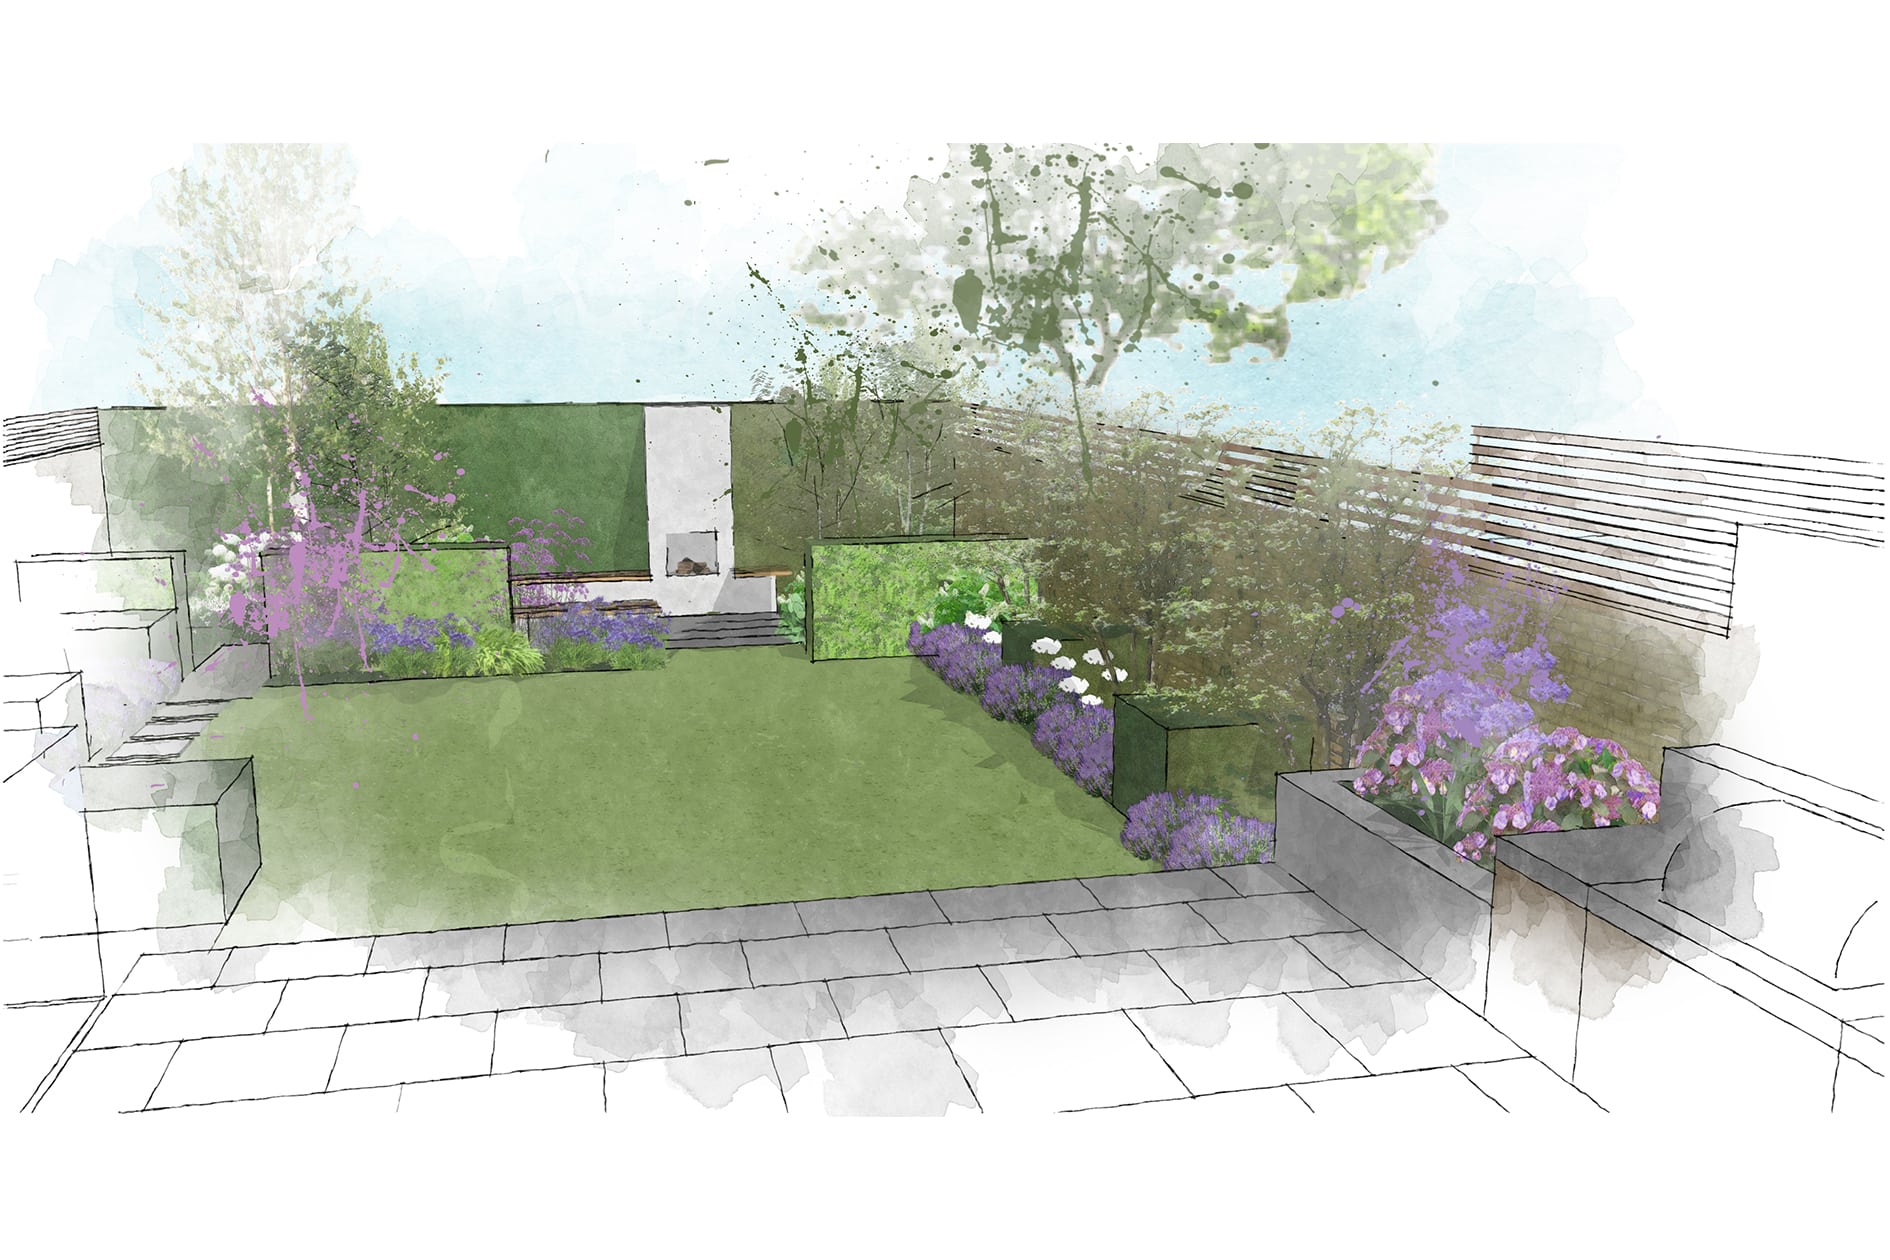 A new London garden with an outdoor kitchen & fireplace. Visual drawn by Fiona Silk Landscapes & Learning.